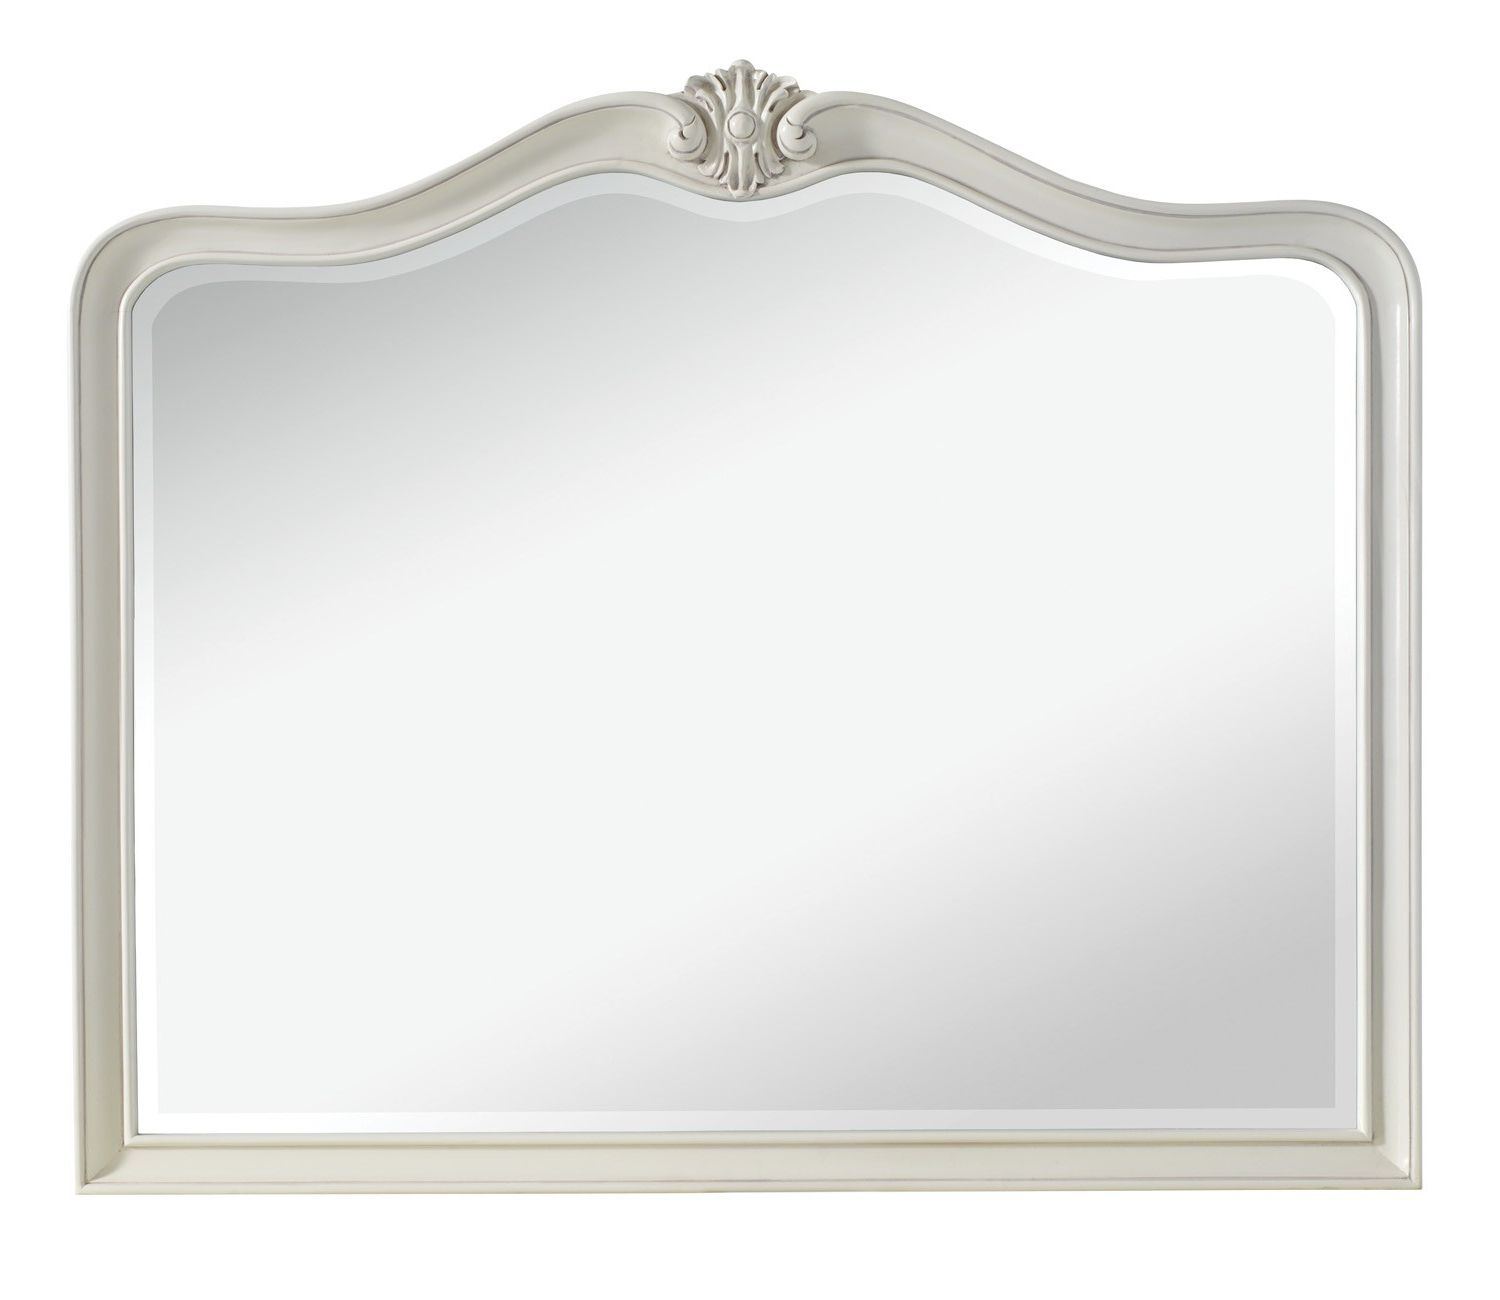 Painted Wall Mirrors With Well Known Loire Painted Wall Mirror (View 10 of 20)